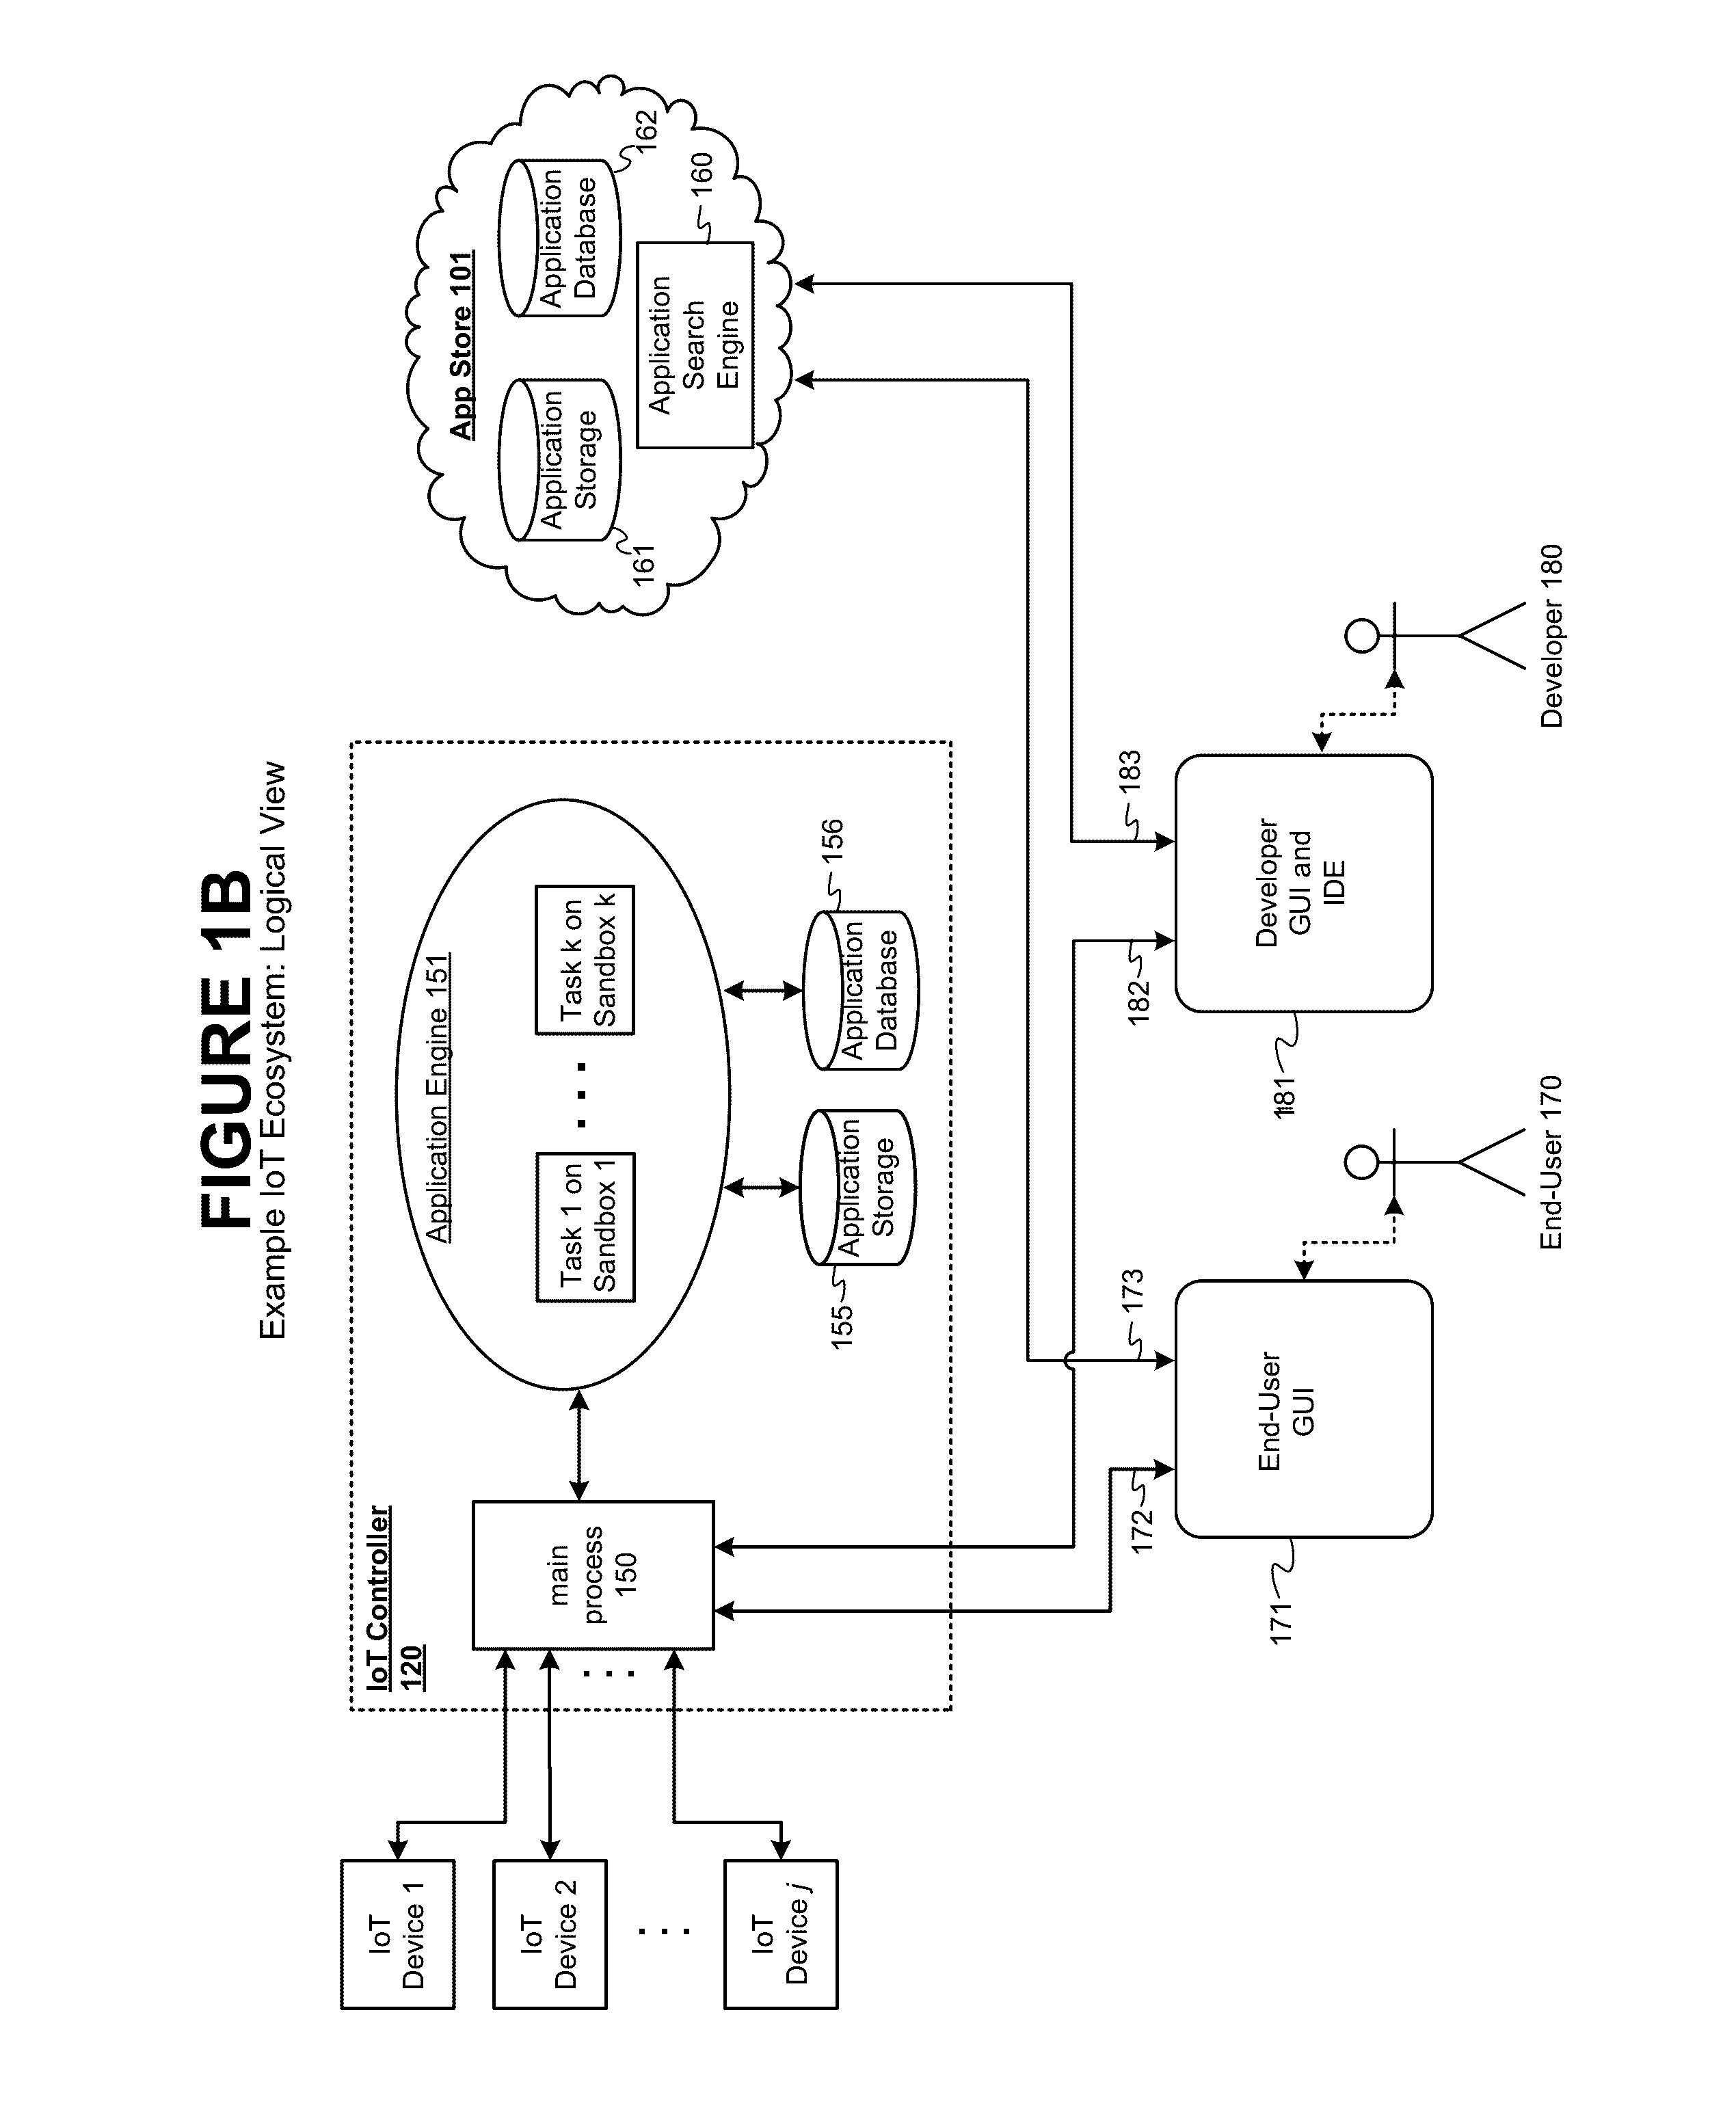 Method and Apparatus for an Internet of Things Controller